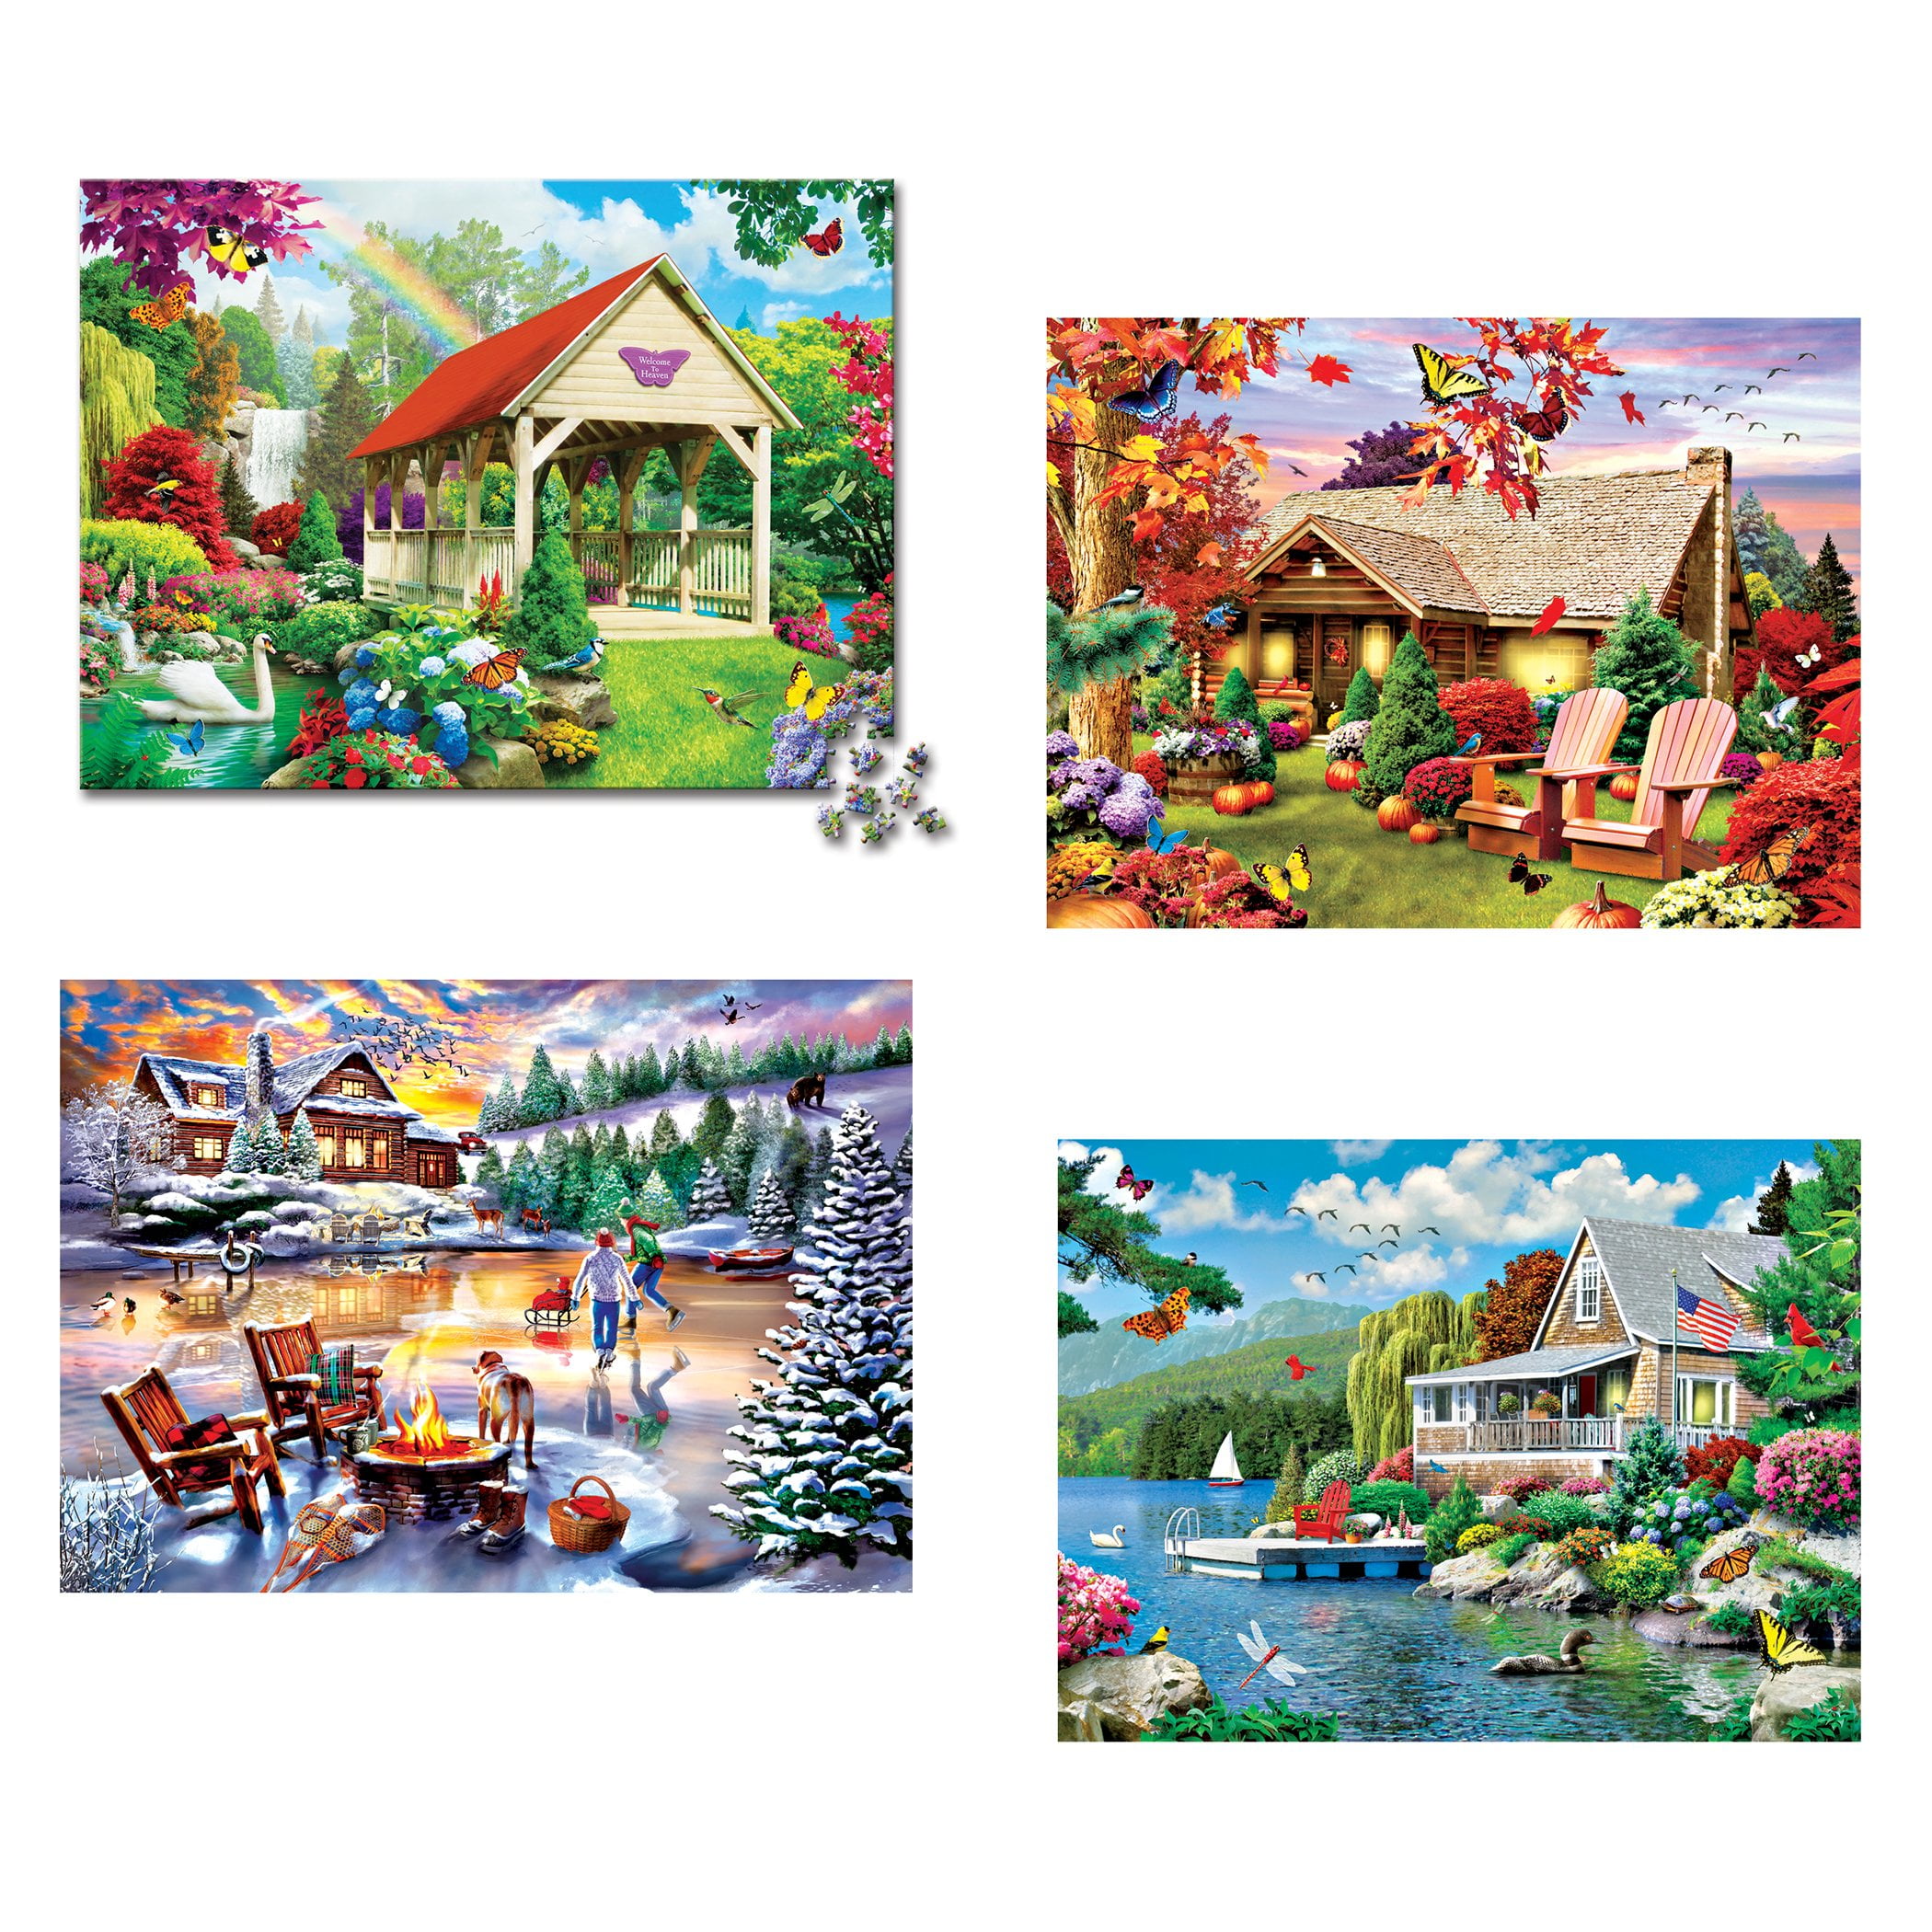 Classical Building 500 Piece Jigsaw Puzzle Size 46x28cm Adult Kid Festival Gift 